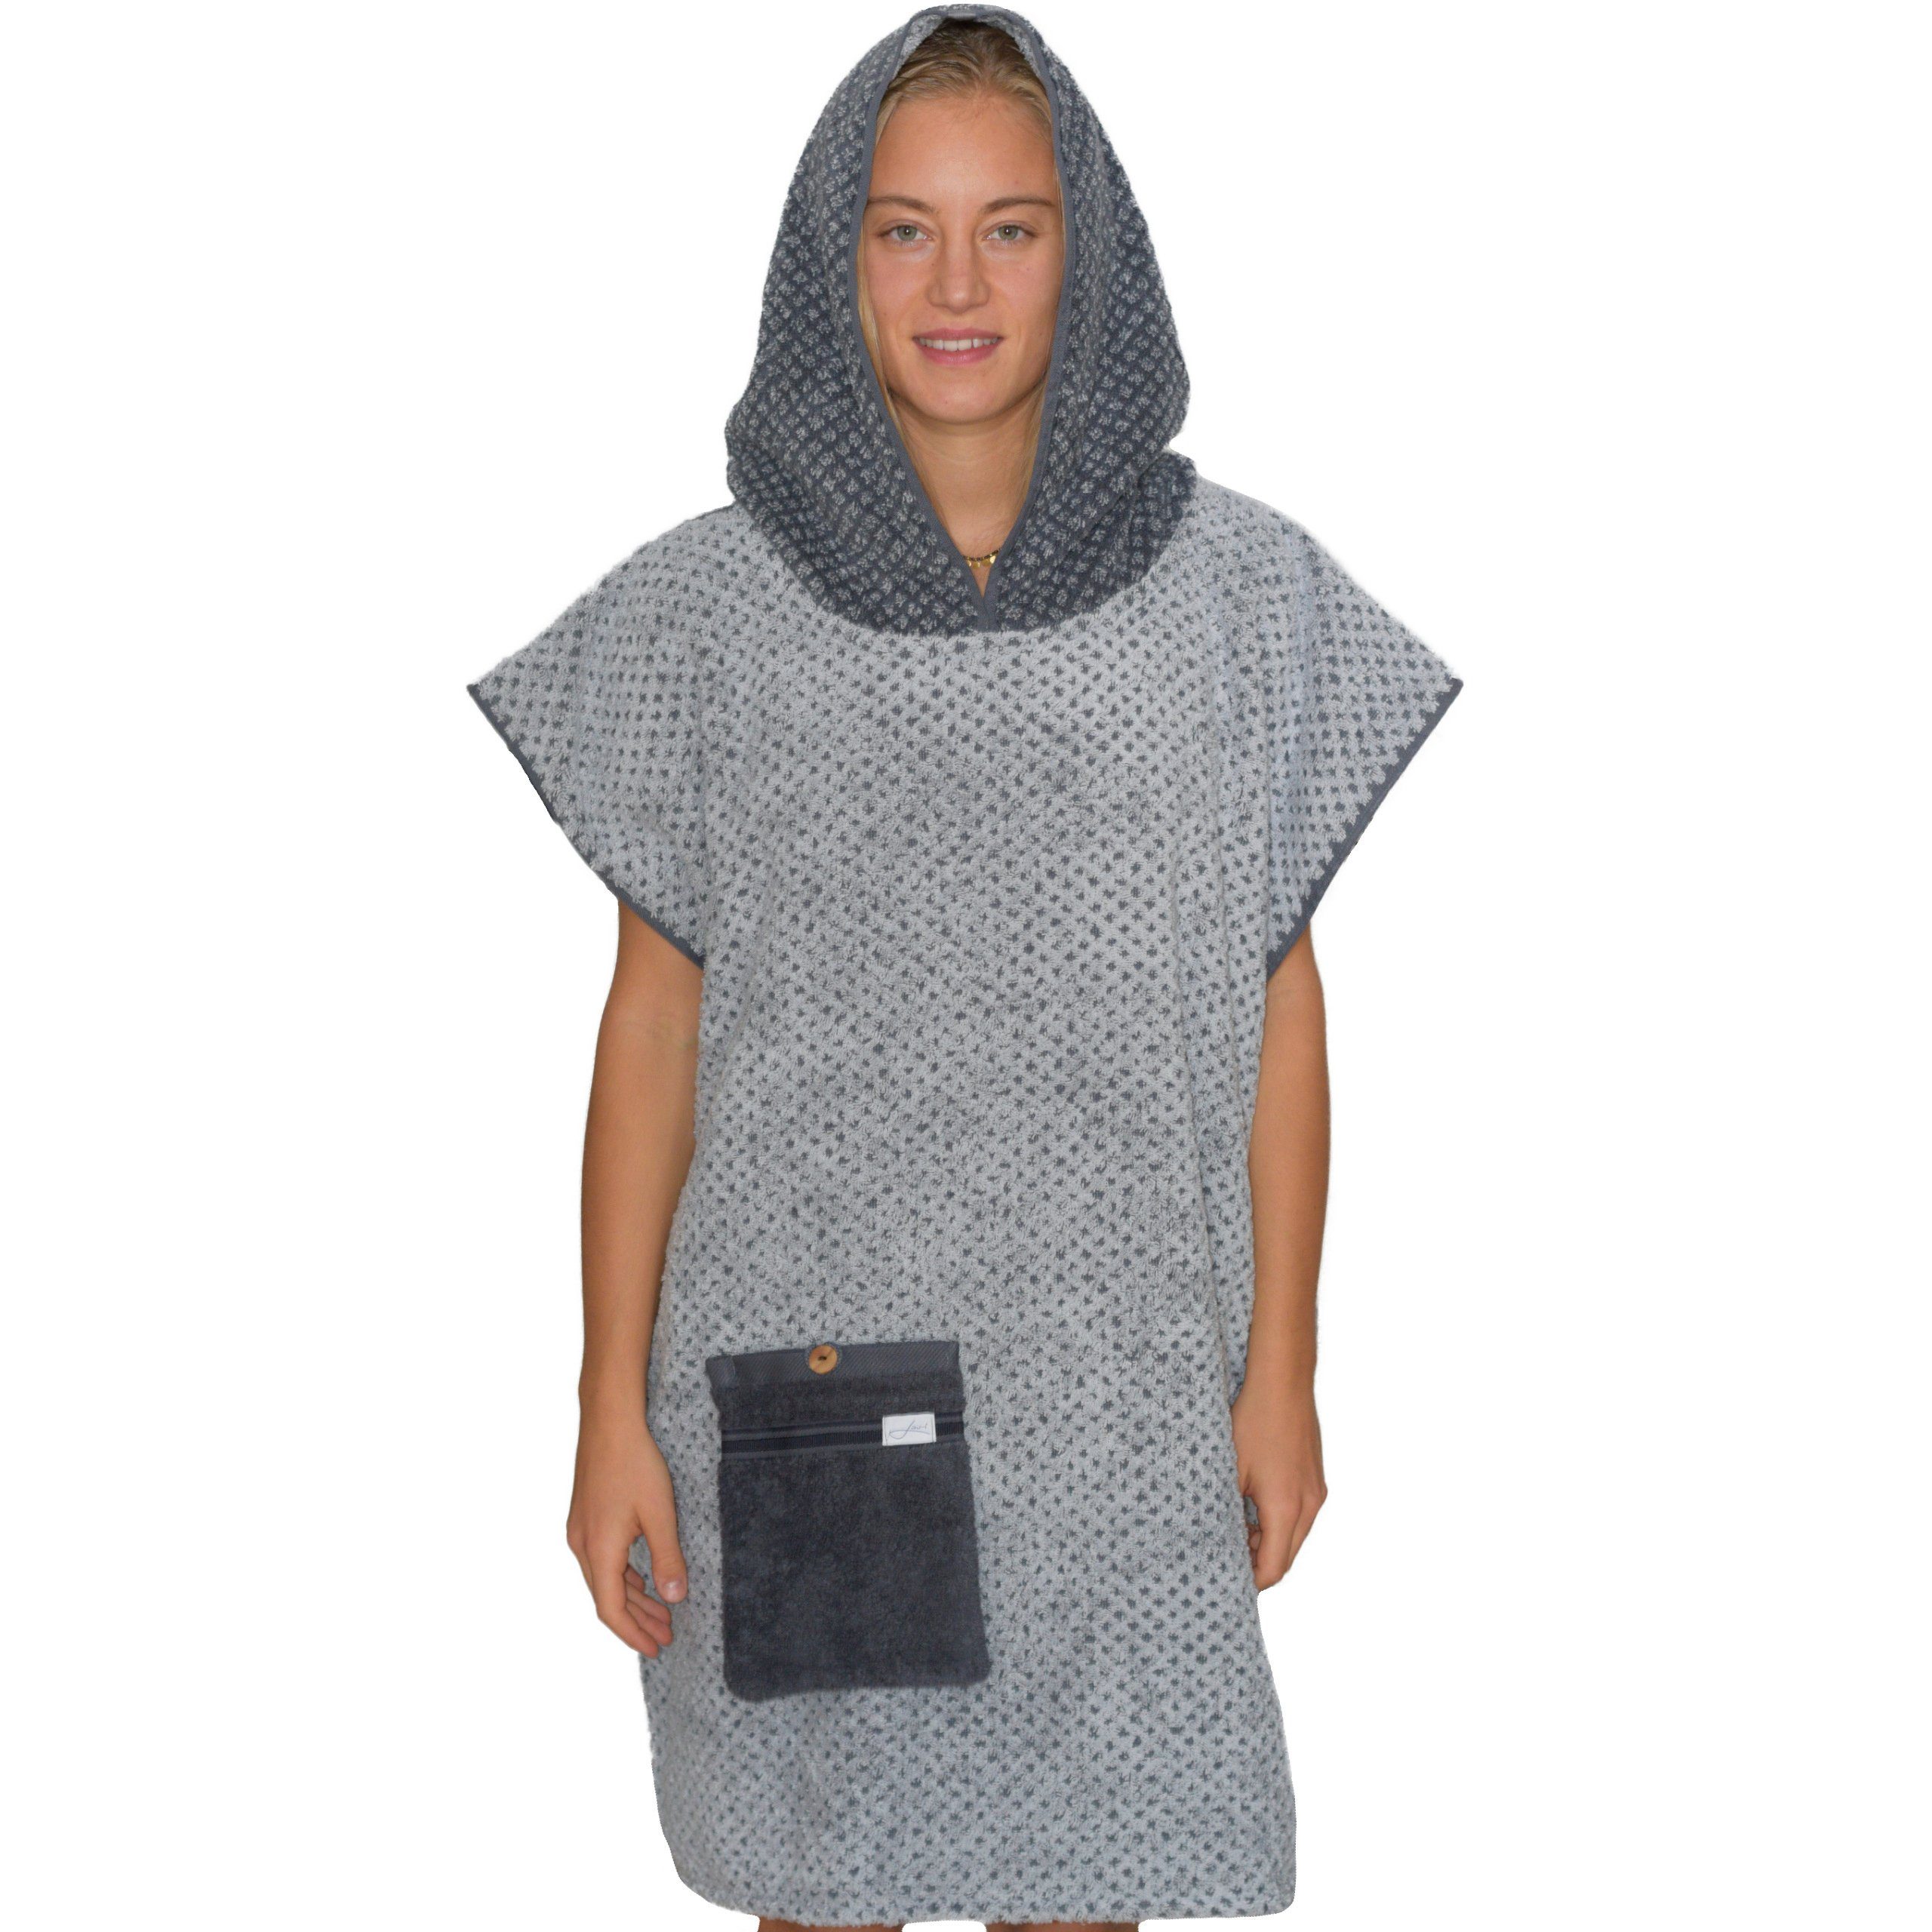 Silber Surfponcho Erwachsene Badeumhang, Kapuze Kapuze, und in mit Made Germany Lou-i Badeponcho Tasche Frottee